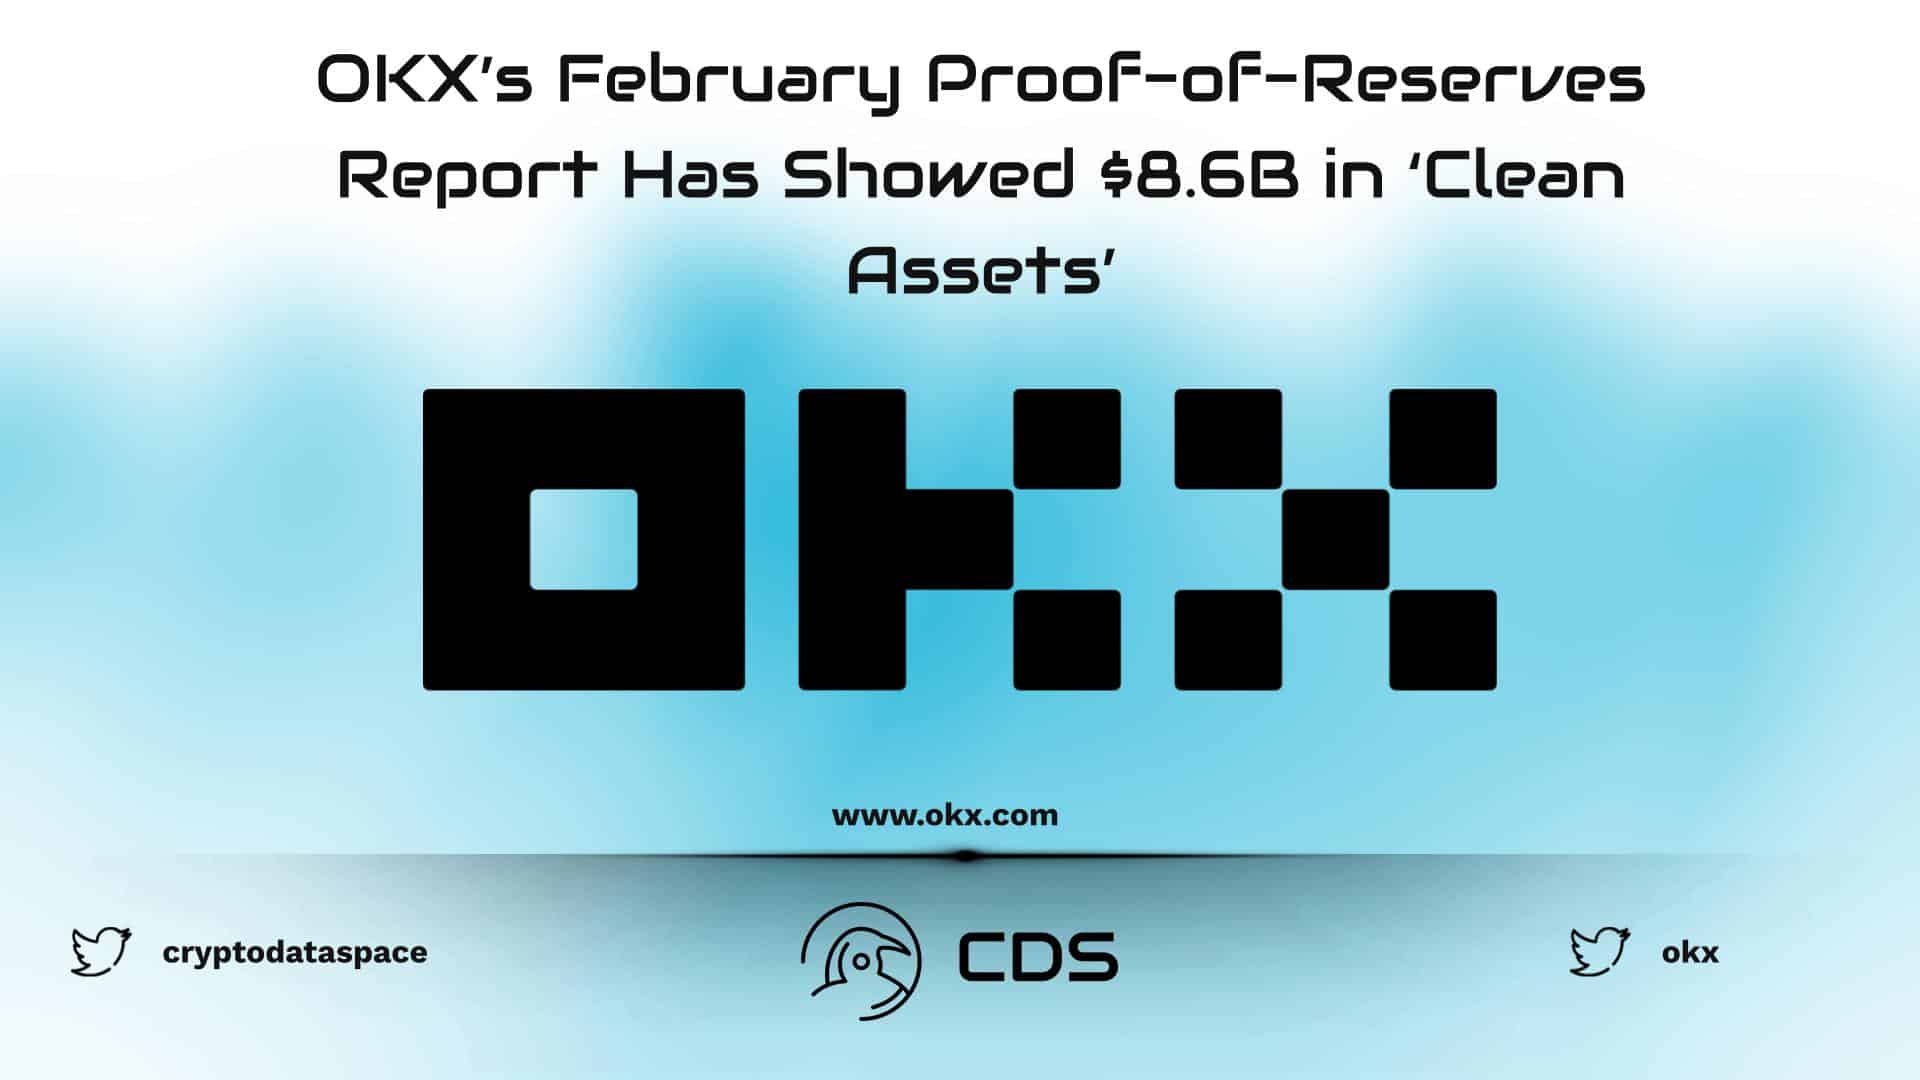 OKX’s February Proof-of-Reserves Report Has Showed $8.6B in ‘Clean Assets’